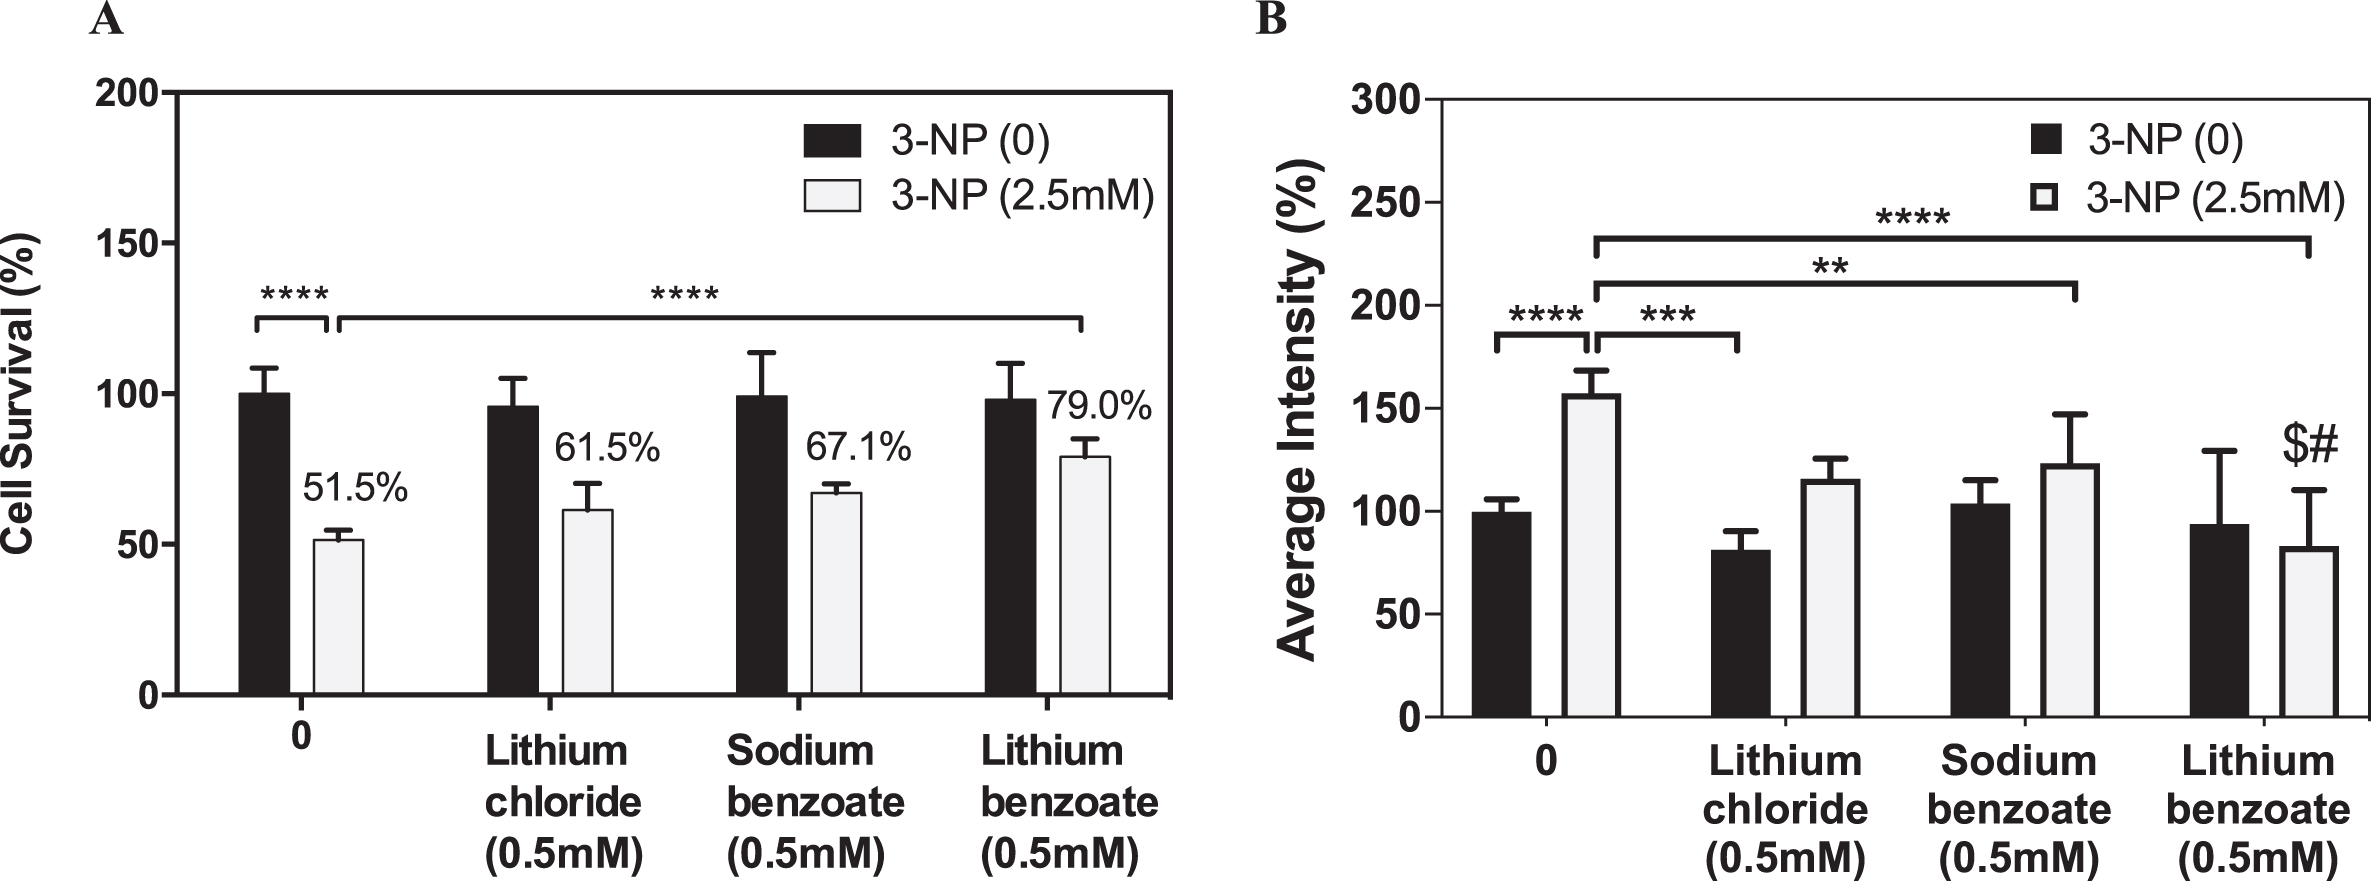 Effects of lithium chloride, sodium benzoate, and lithium benzoate on neuron protection and ROS reduction in 3-NP-treated neuronal cells. Primary rat cortical neuron cultures were treated with lithium chloride (LiCl), sodium benzoate (SB), or lithium benzoate (LiBen) at 0.5 mM for 24 h prior to 3-nitropropionic acid (3-NP) at 2.5 mM exposure for additional 24 h. A) Cell survival was assessed by counting of Hoechst-stained nuclei of surviving cells from each group. B) The 3-NP-induced reactive oxygen species (ROS) production in the primary rat neuronal culture was quantified by using CellRox fluorescence staining. Data represent mean ± SD from N = 3 for each experiment condition and analyzed by one-way analysis of variance (ANOVA) followed by a post hoc Student-Newman-Keuls test. **p<0.01; ***p<0.001; ****p<0.0001 as compared to the cells challenged with 3-NP alone without preconditioning. $ represents p < 0.05 as LiBen compared to LiCl with 3-NP treatment. # represents p < 0.01 as LiBen compared to SB with 3-NP treatment.